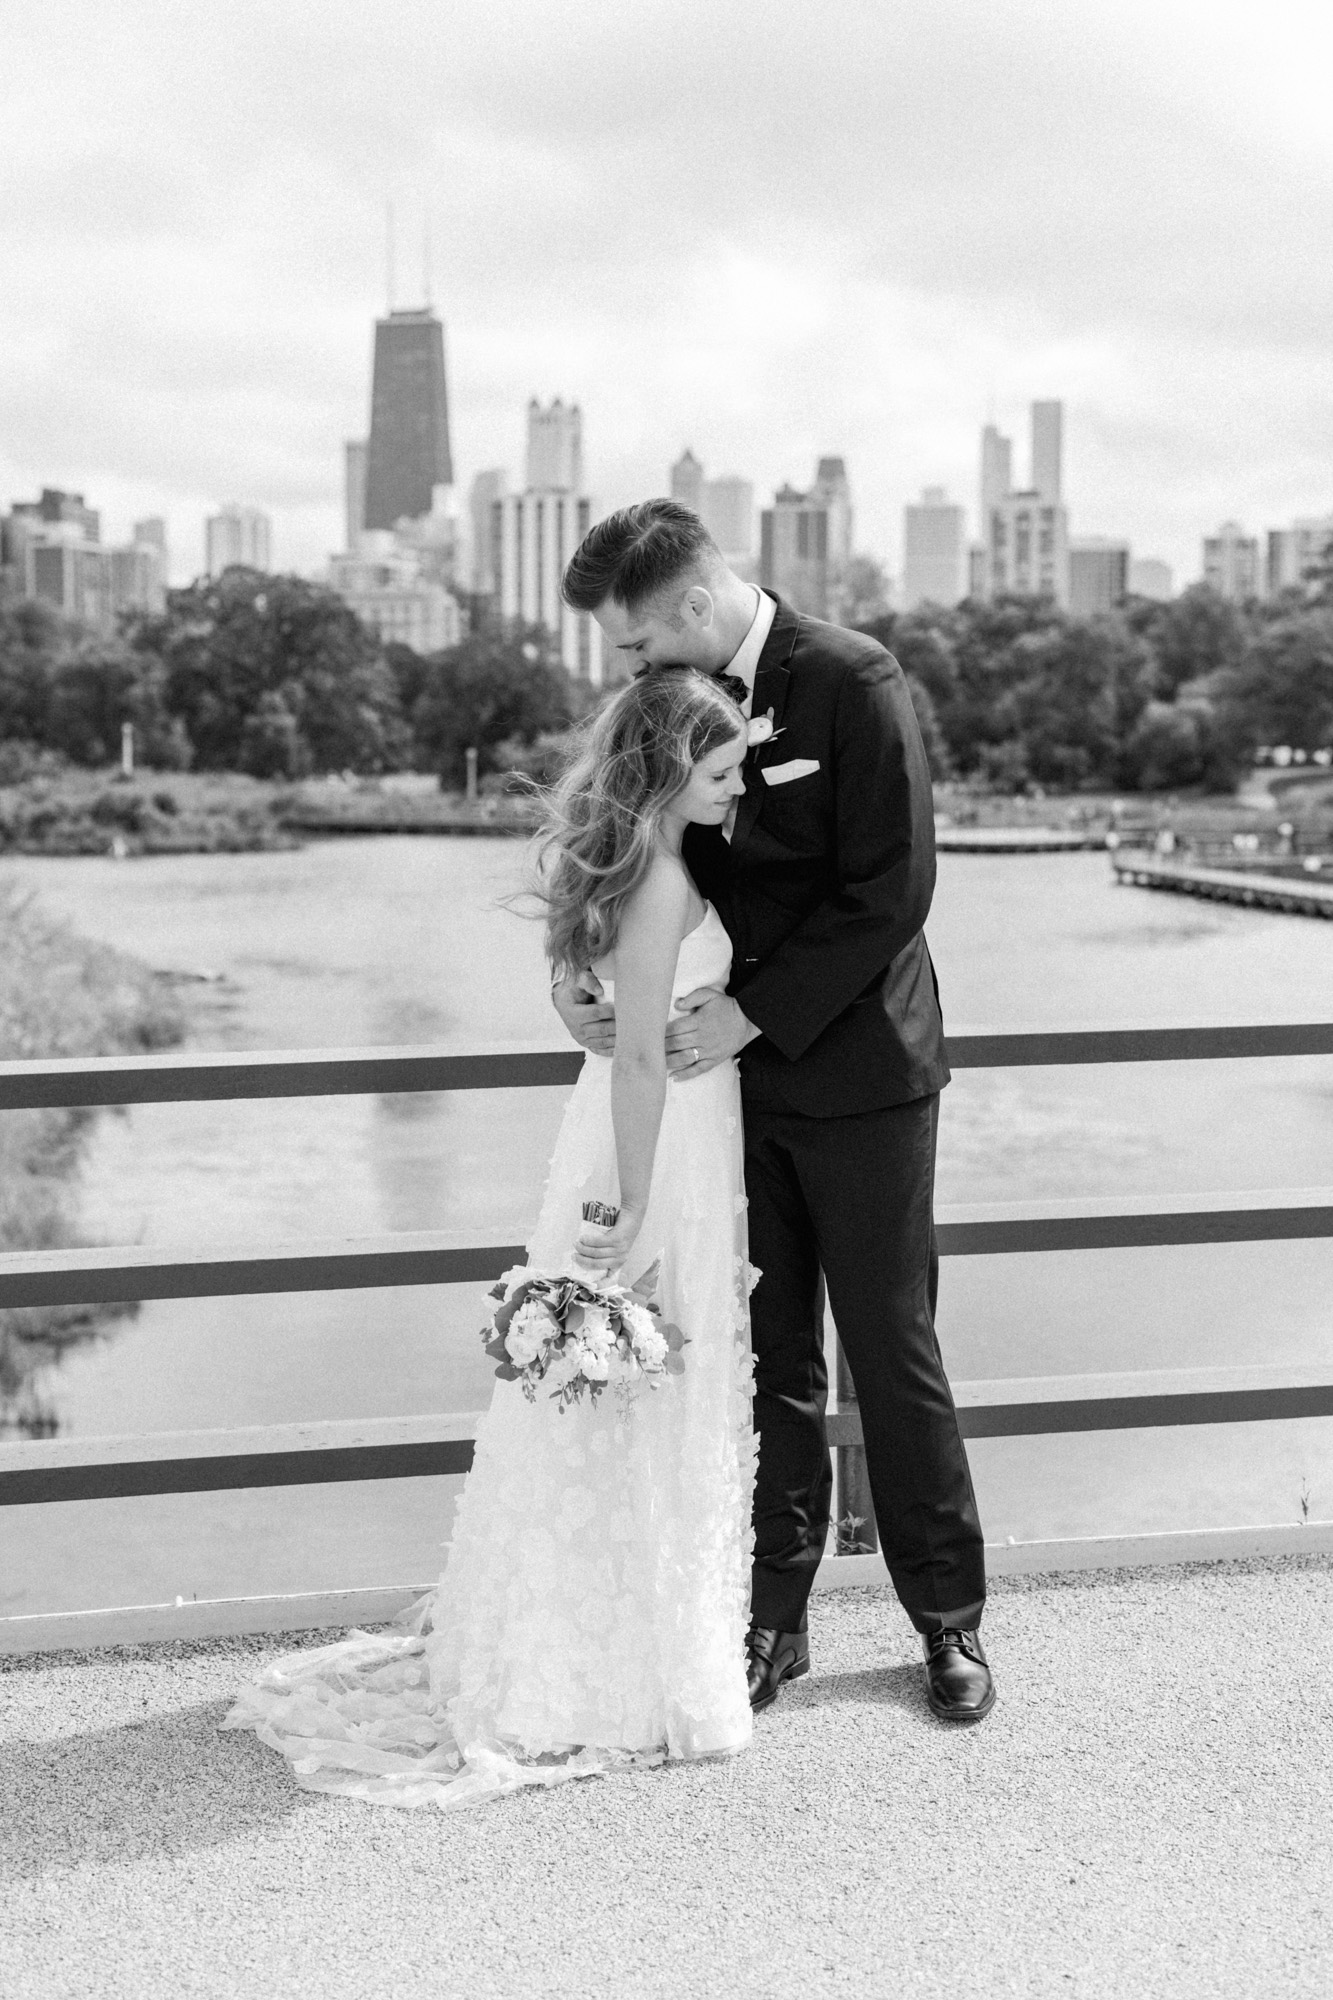 Wedding portraits at Lincoln Park in Chicago